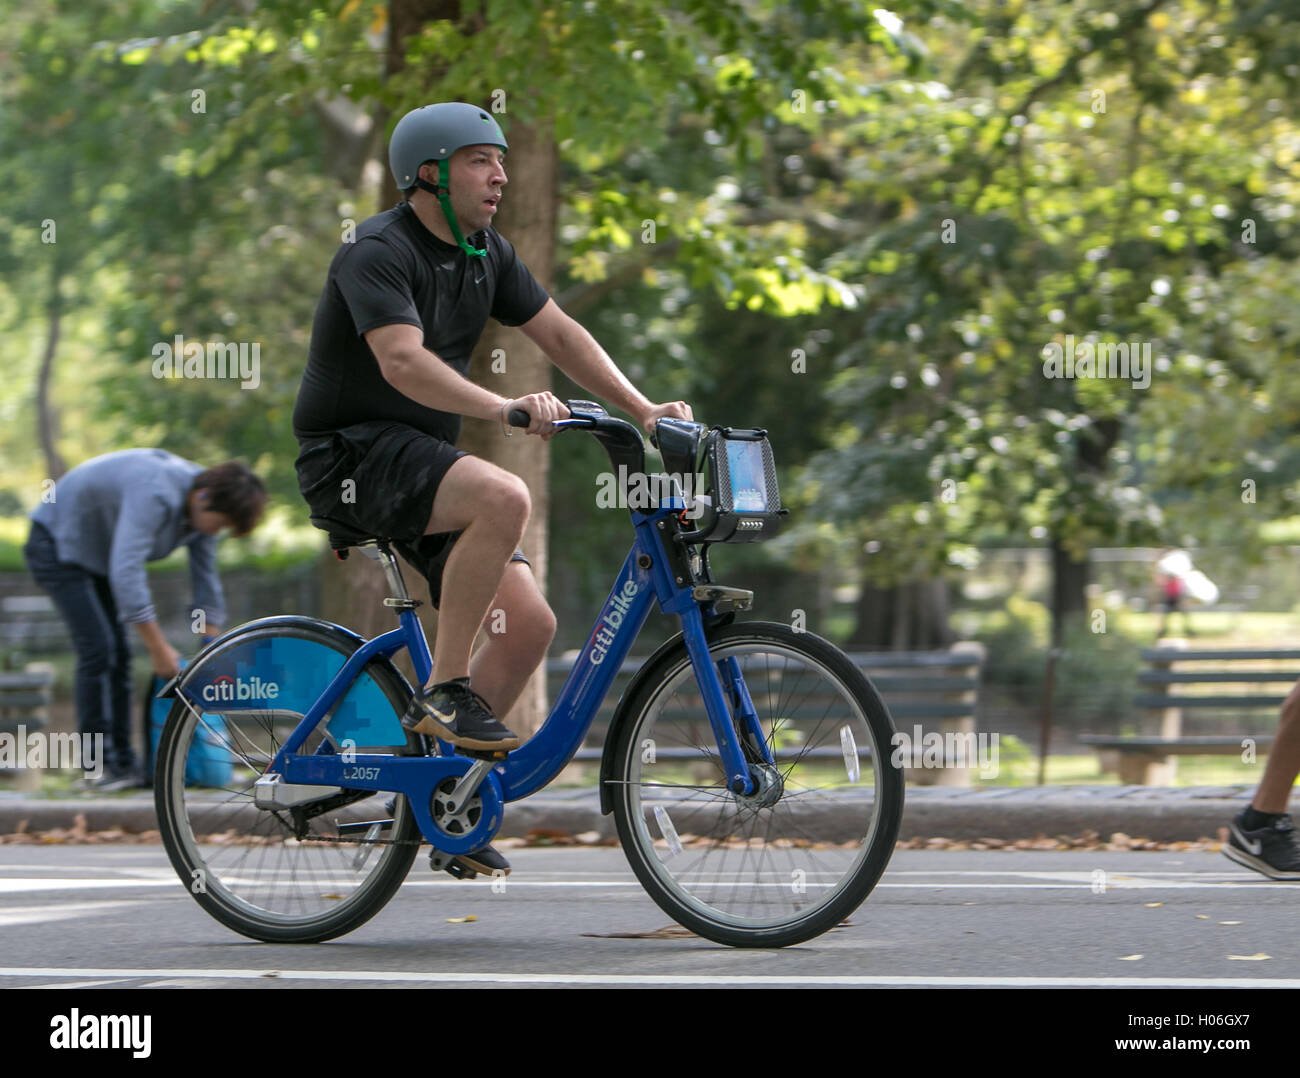 person riding a bicycle in central park